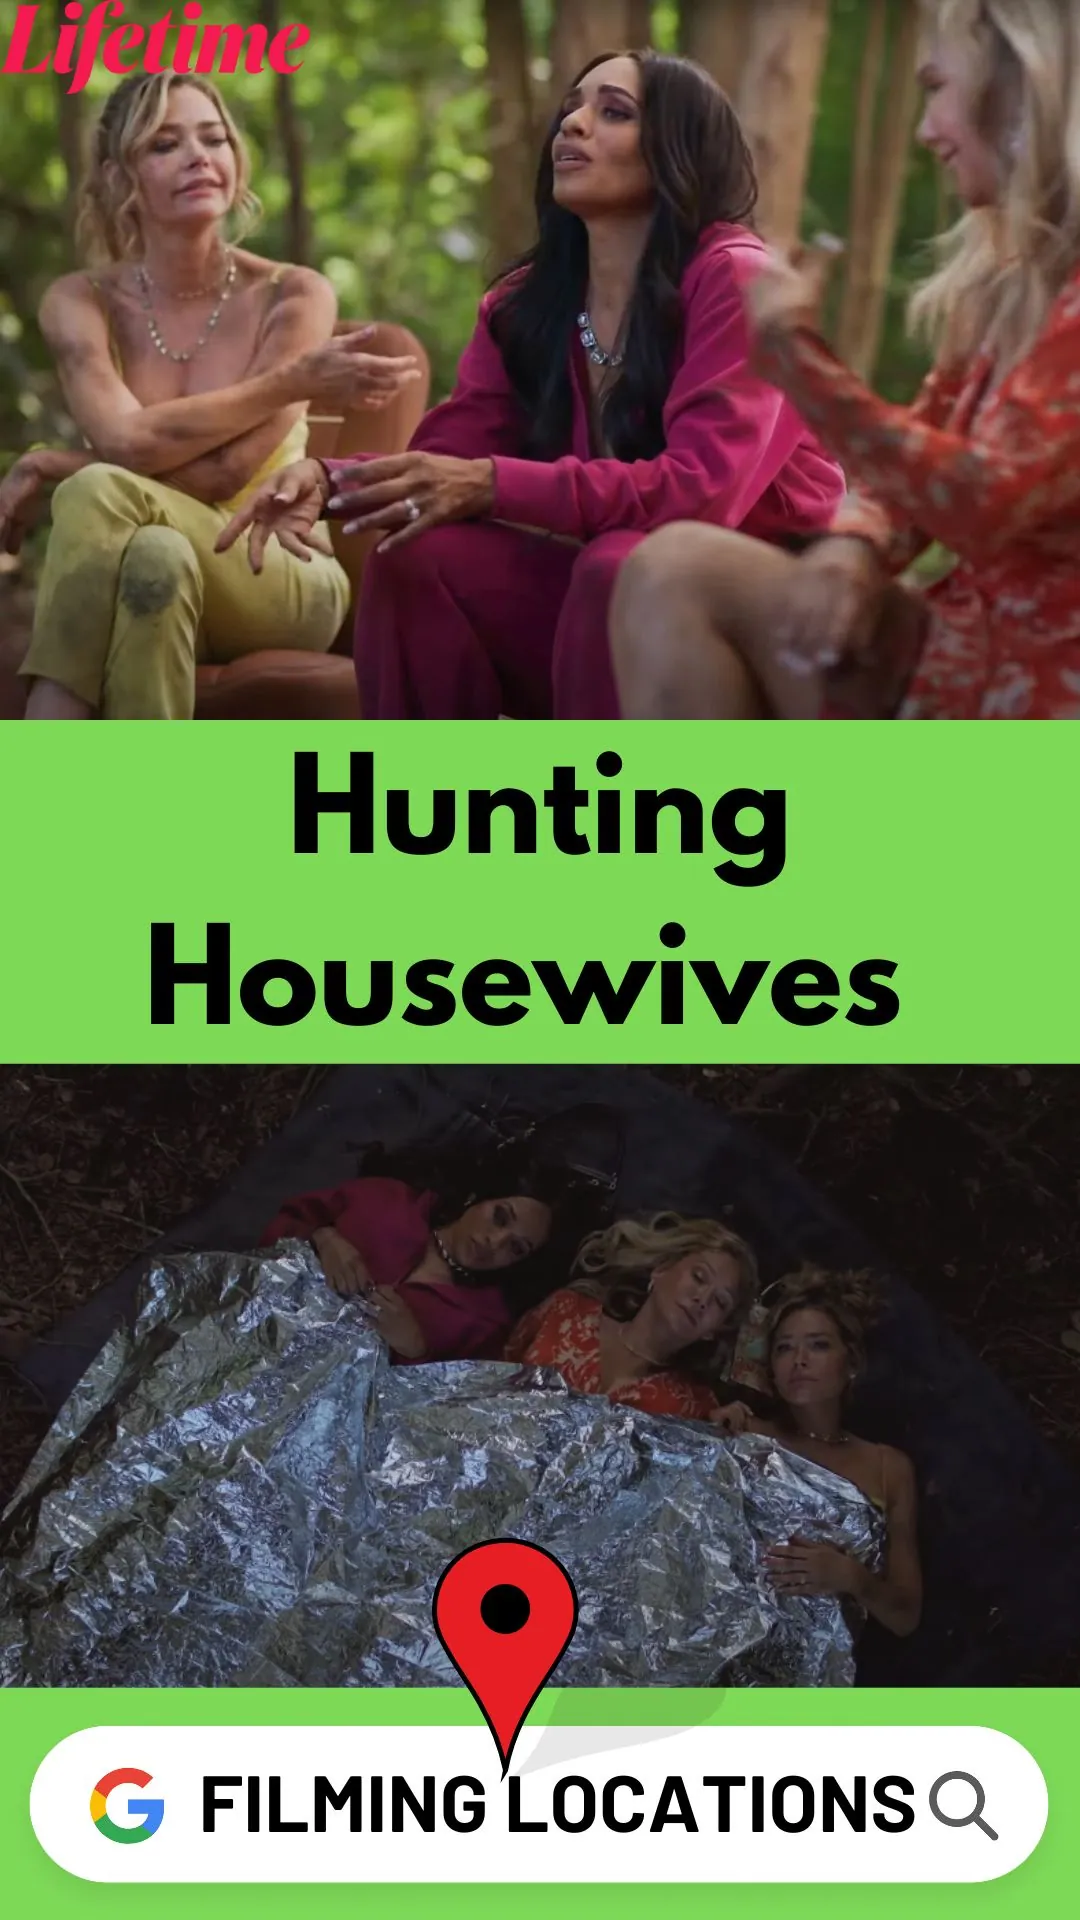 Hunting Housewives Filming Locations